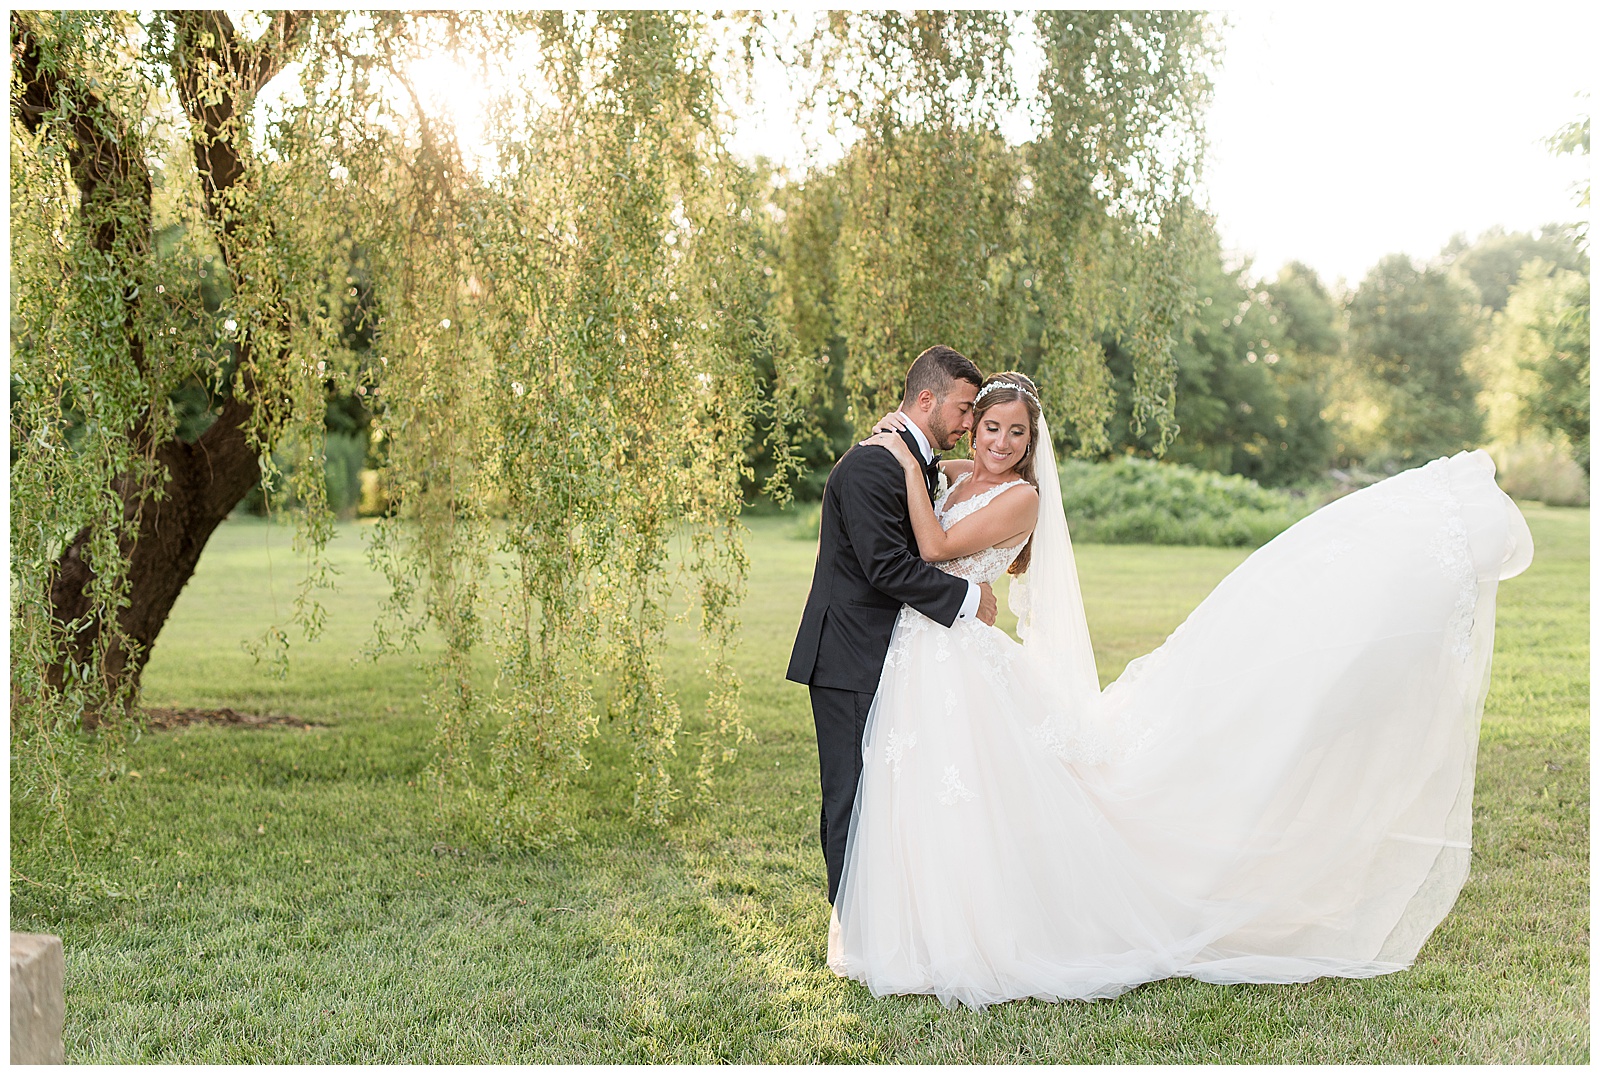 dress flowing in the wind while groom dips bride back in front of willow tree